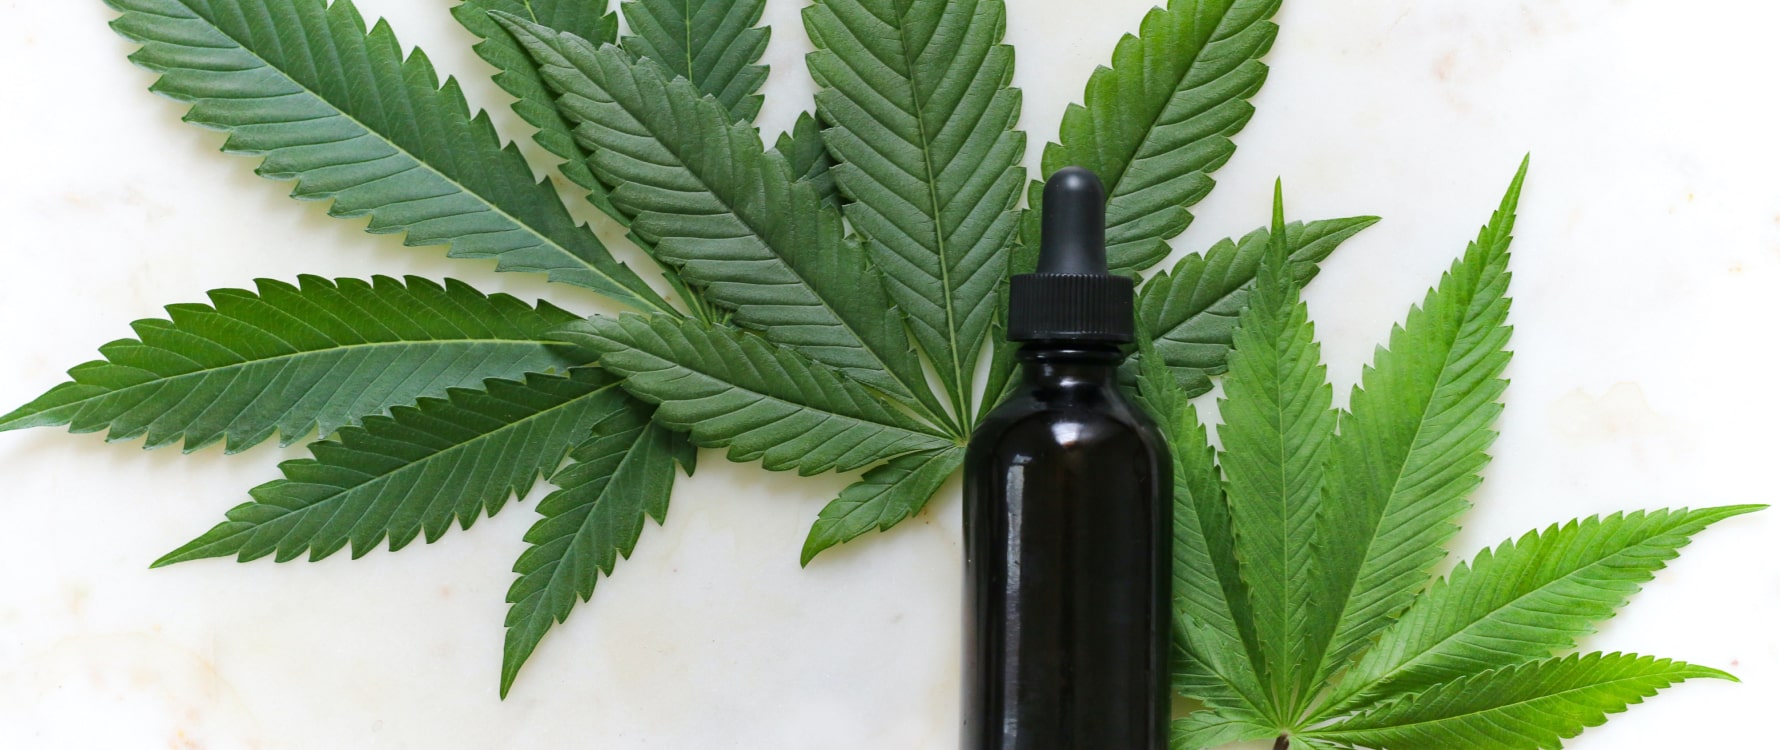 Cannabis Tinctures For Sale Denver - Cannabis-Infused Olive Oil